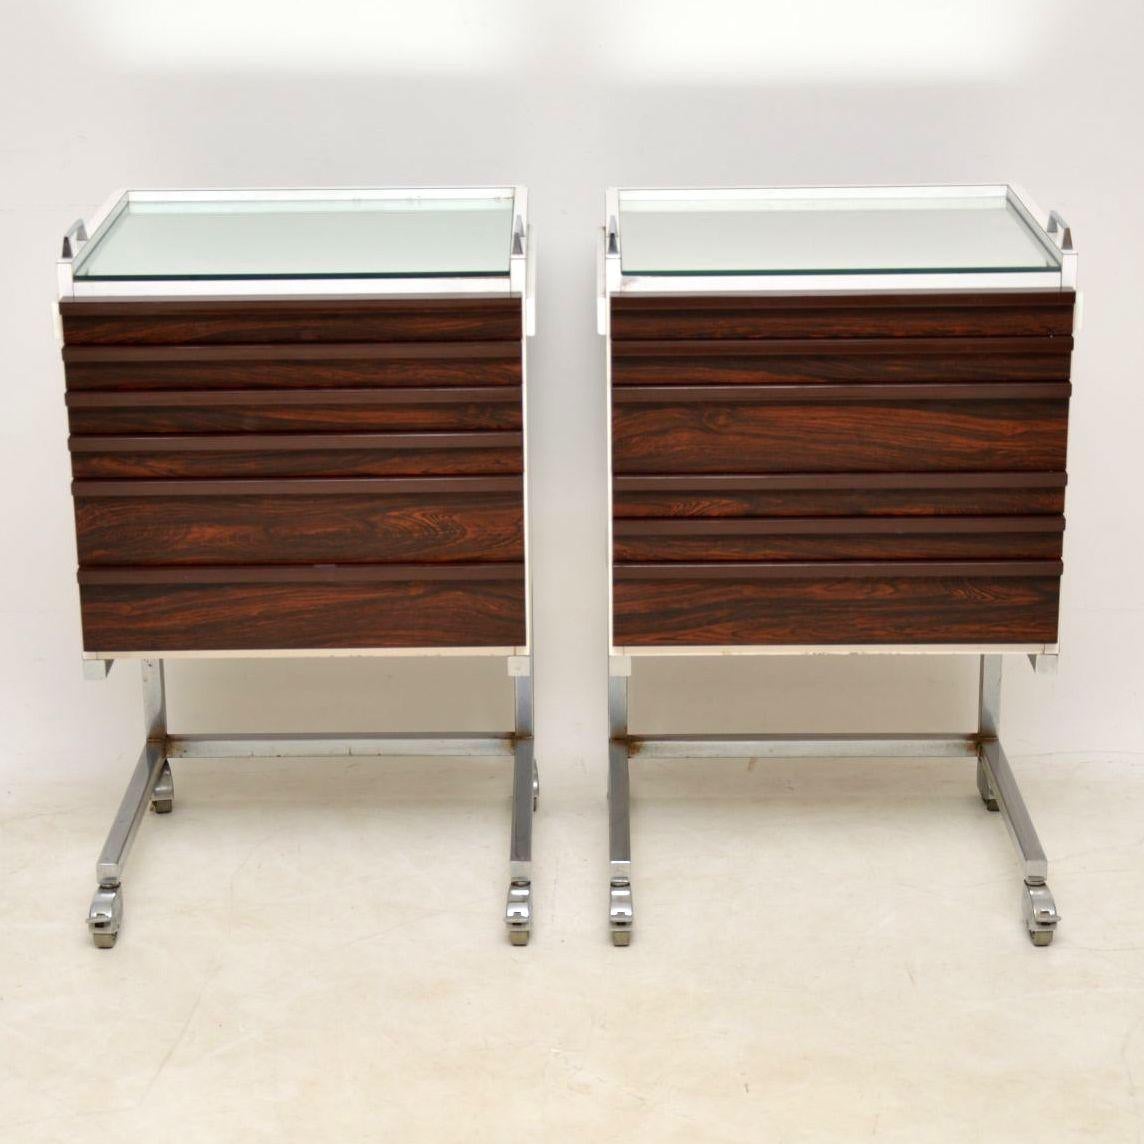 A beautiful and unusual pair of vintage chests, these date from the 1970s and are very versatile. They could be used as bedside chests, in a lounge or office. They are nicely finished on the back, so can be used free standing. They are in great